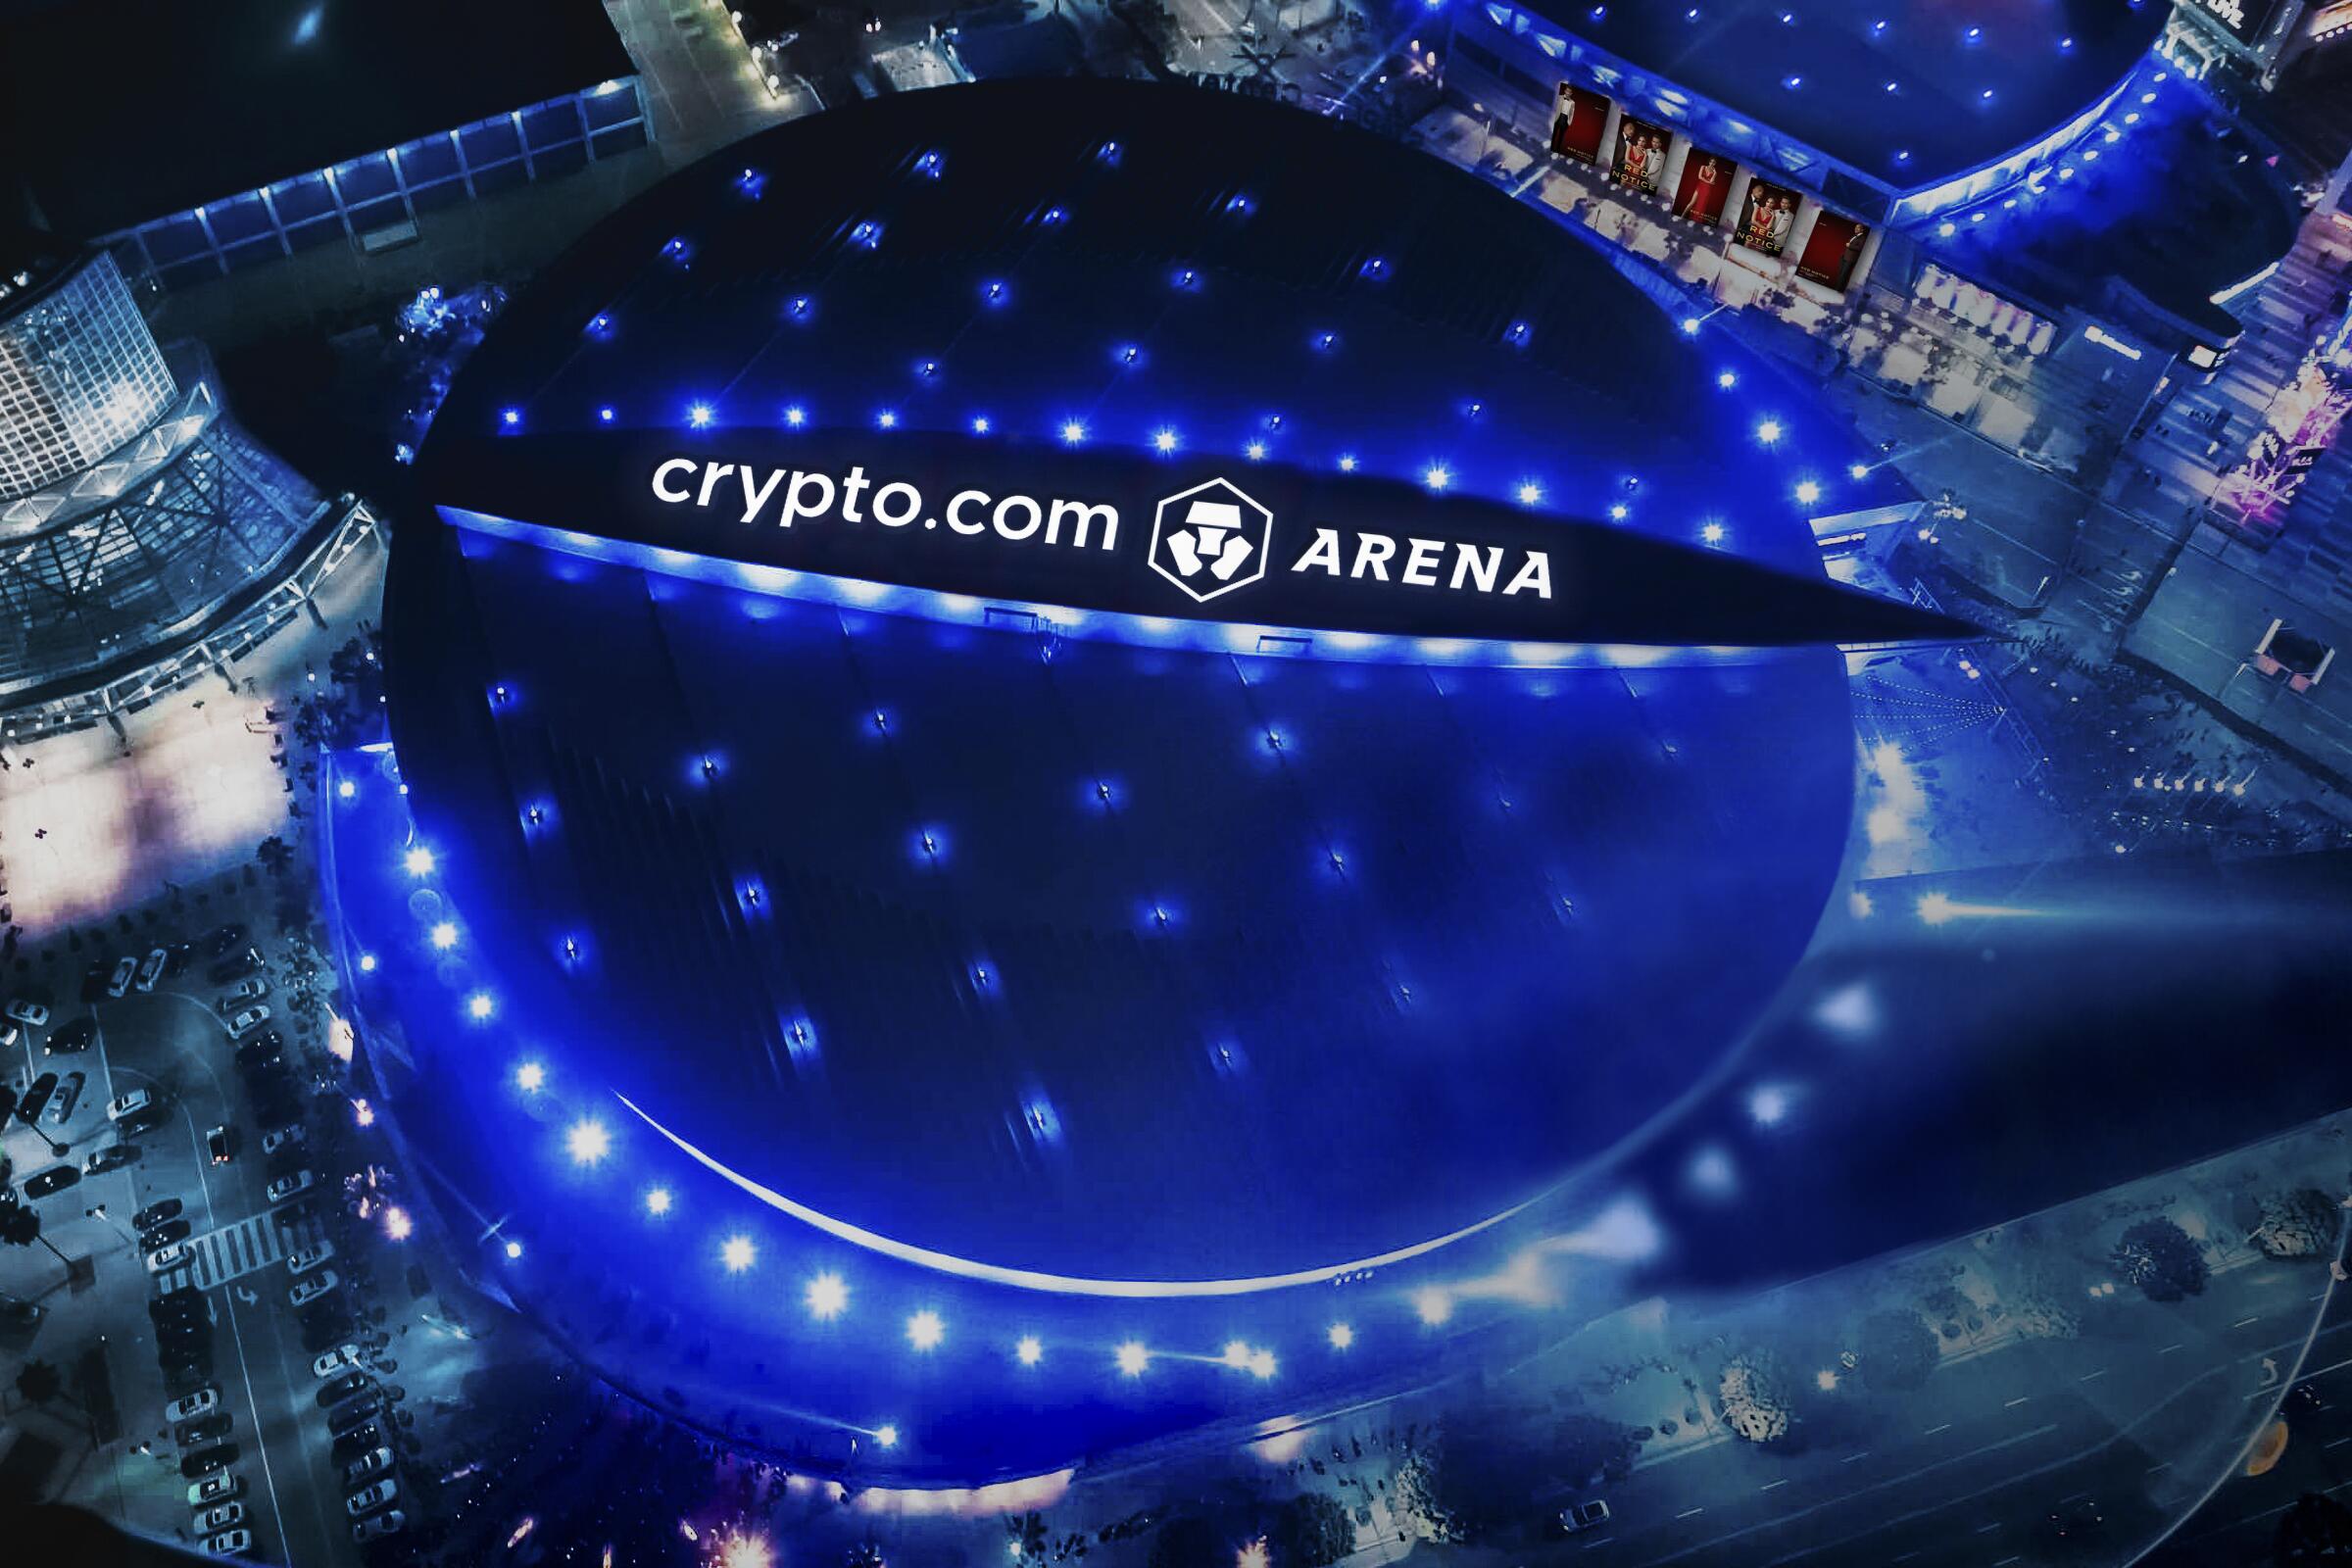 A rendering shows Crypto.com Arena after its planned name change from Staples Center.